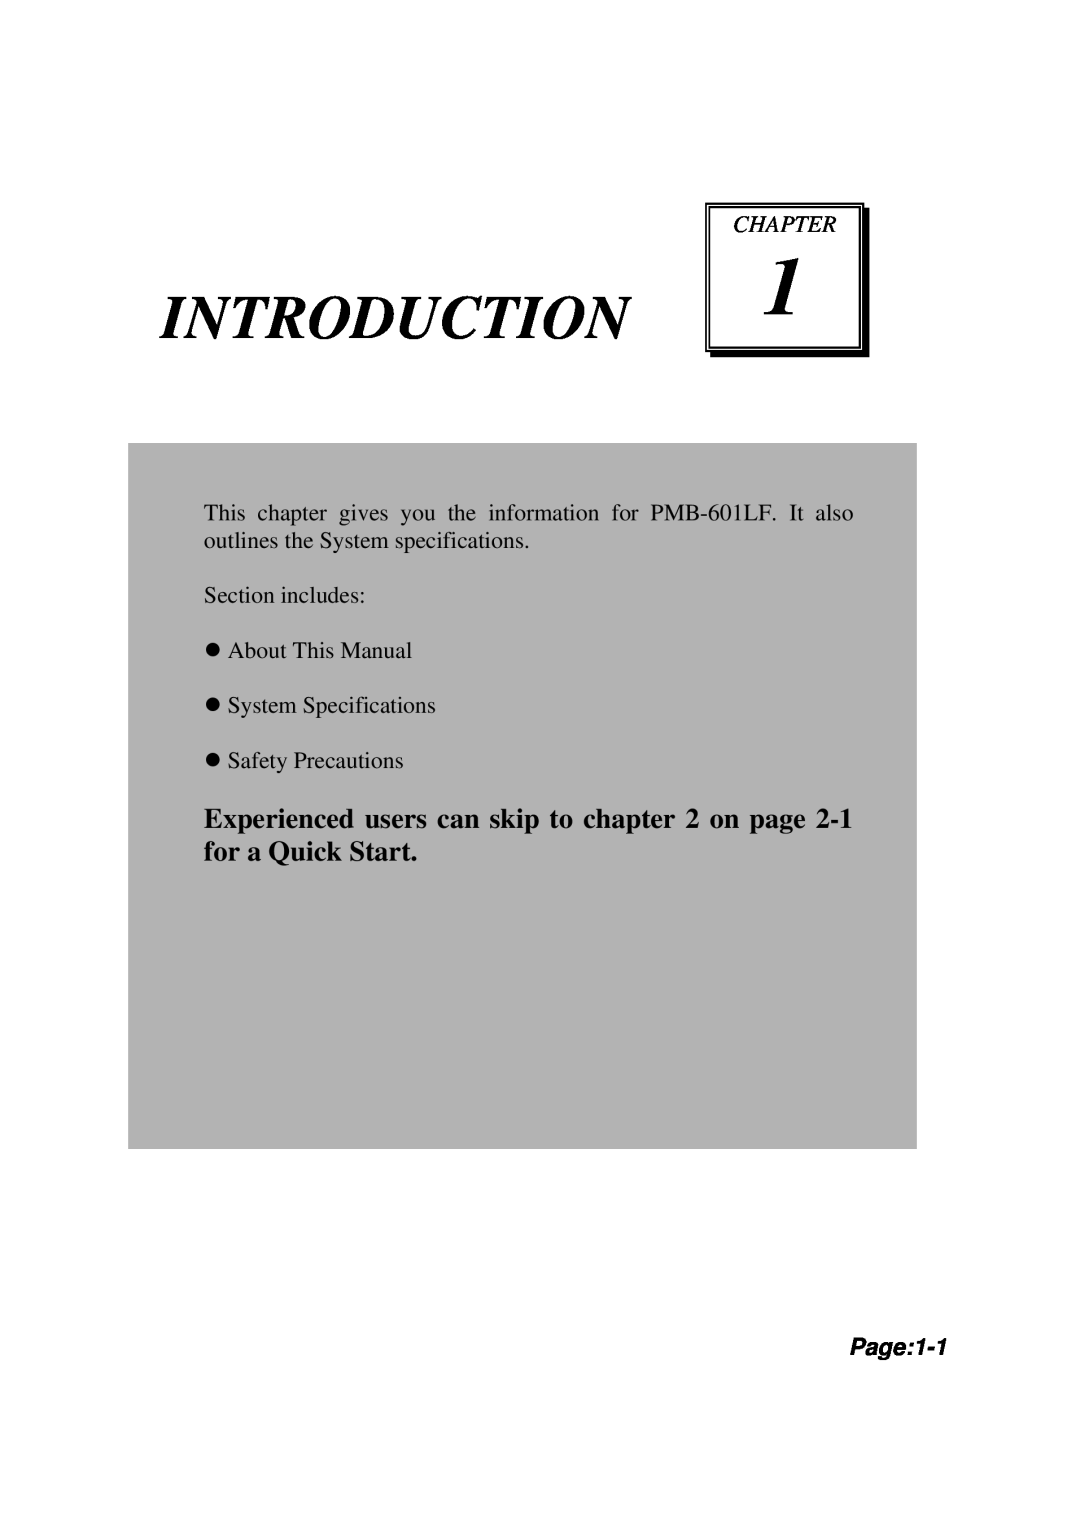 Intel PMB-601LF user manual Introduction, Chapter, Page:1-1 